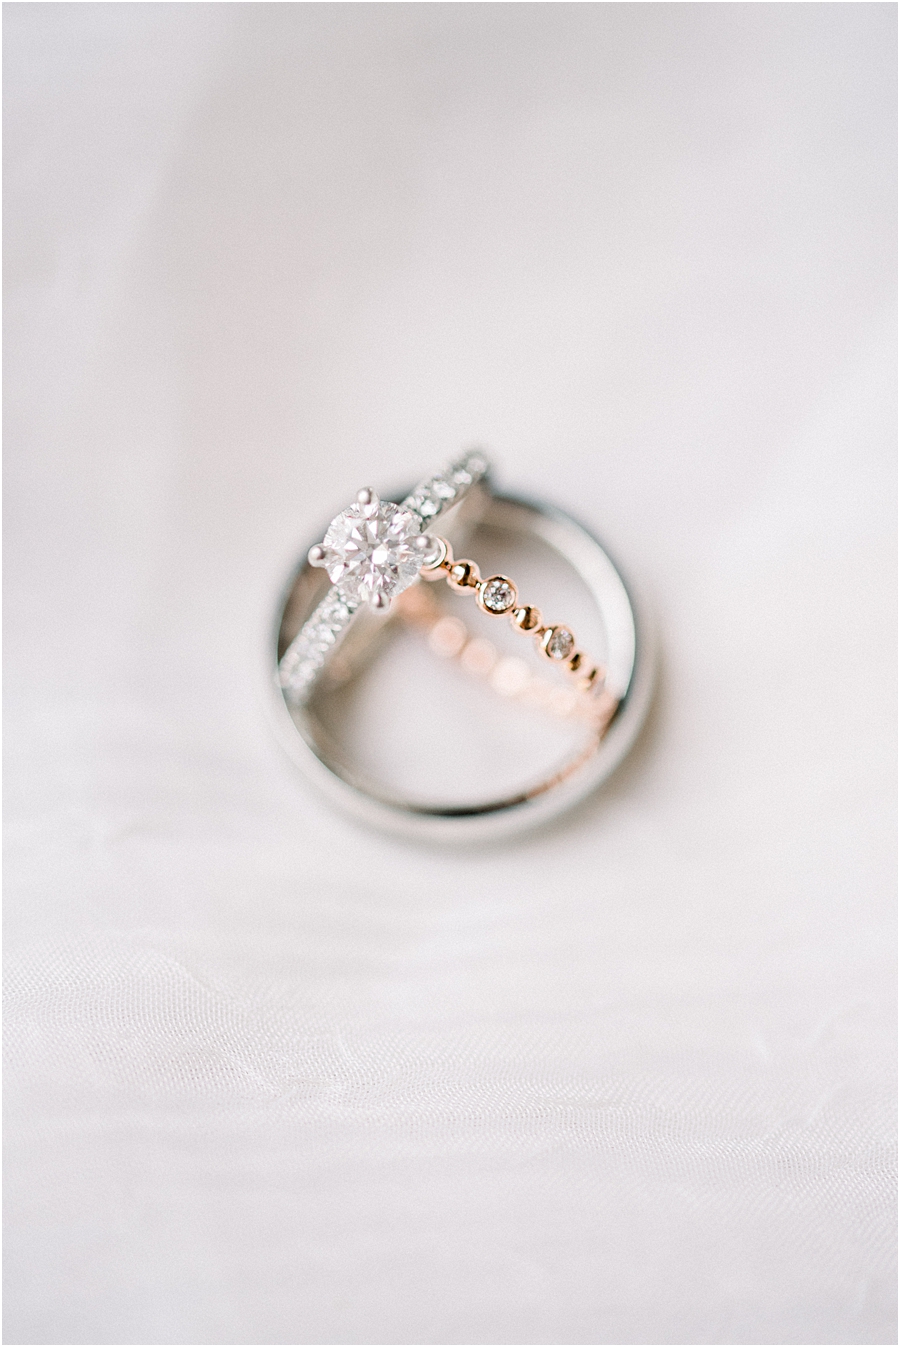 Tips on photographing wedding rings by Hillary Muelleck